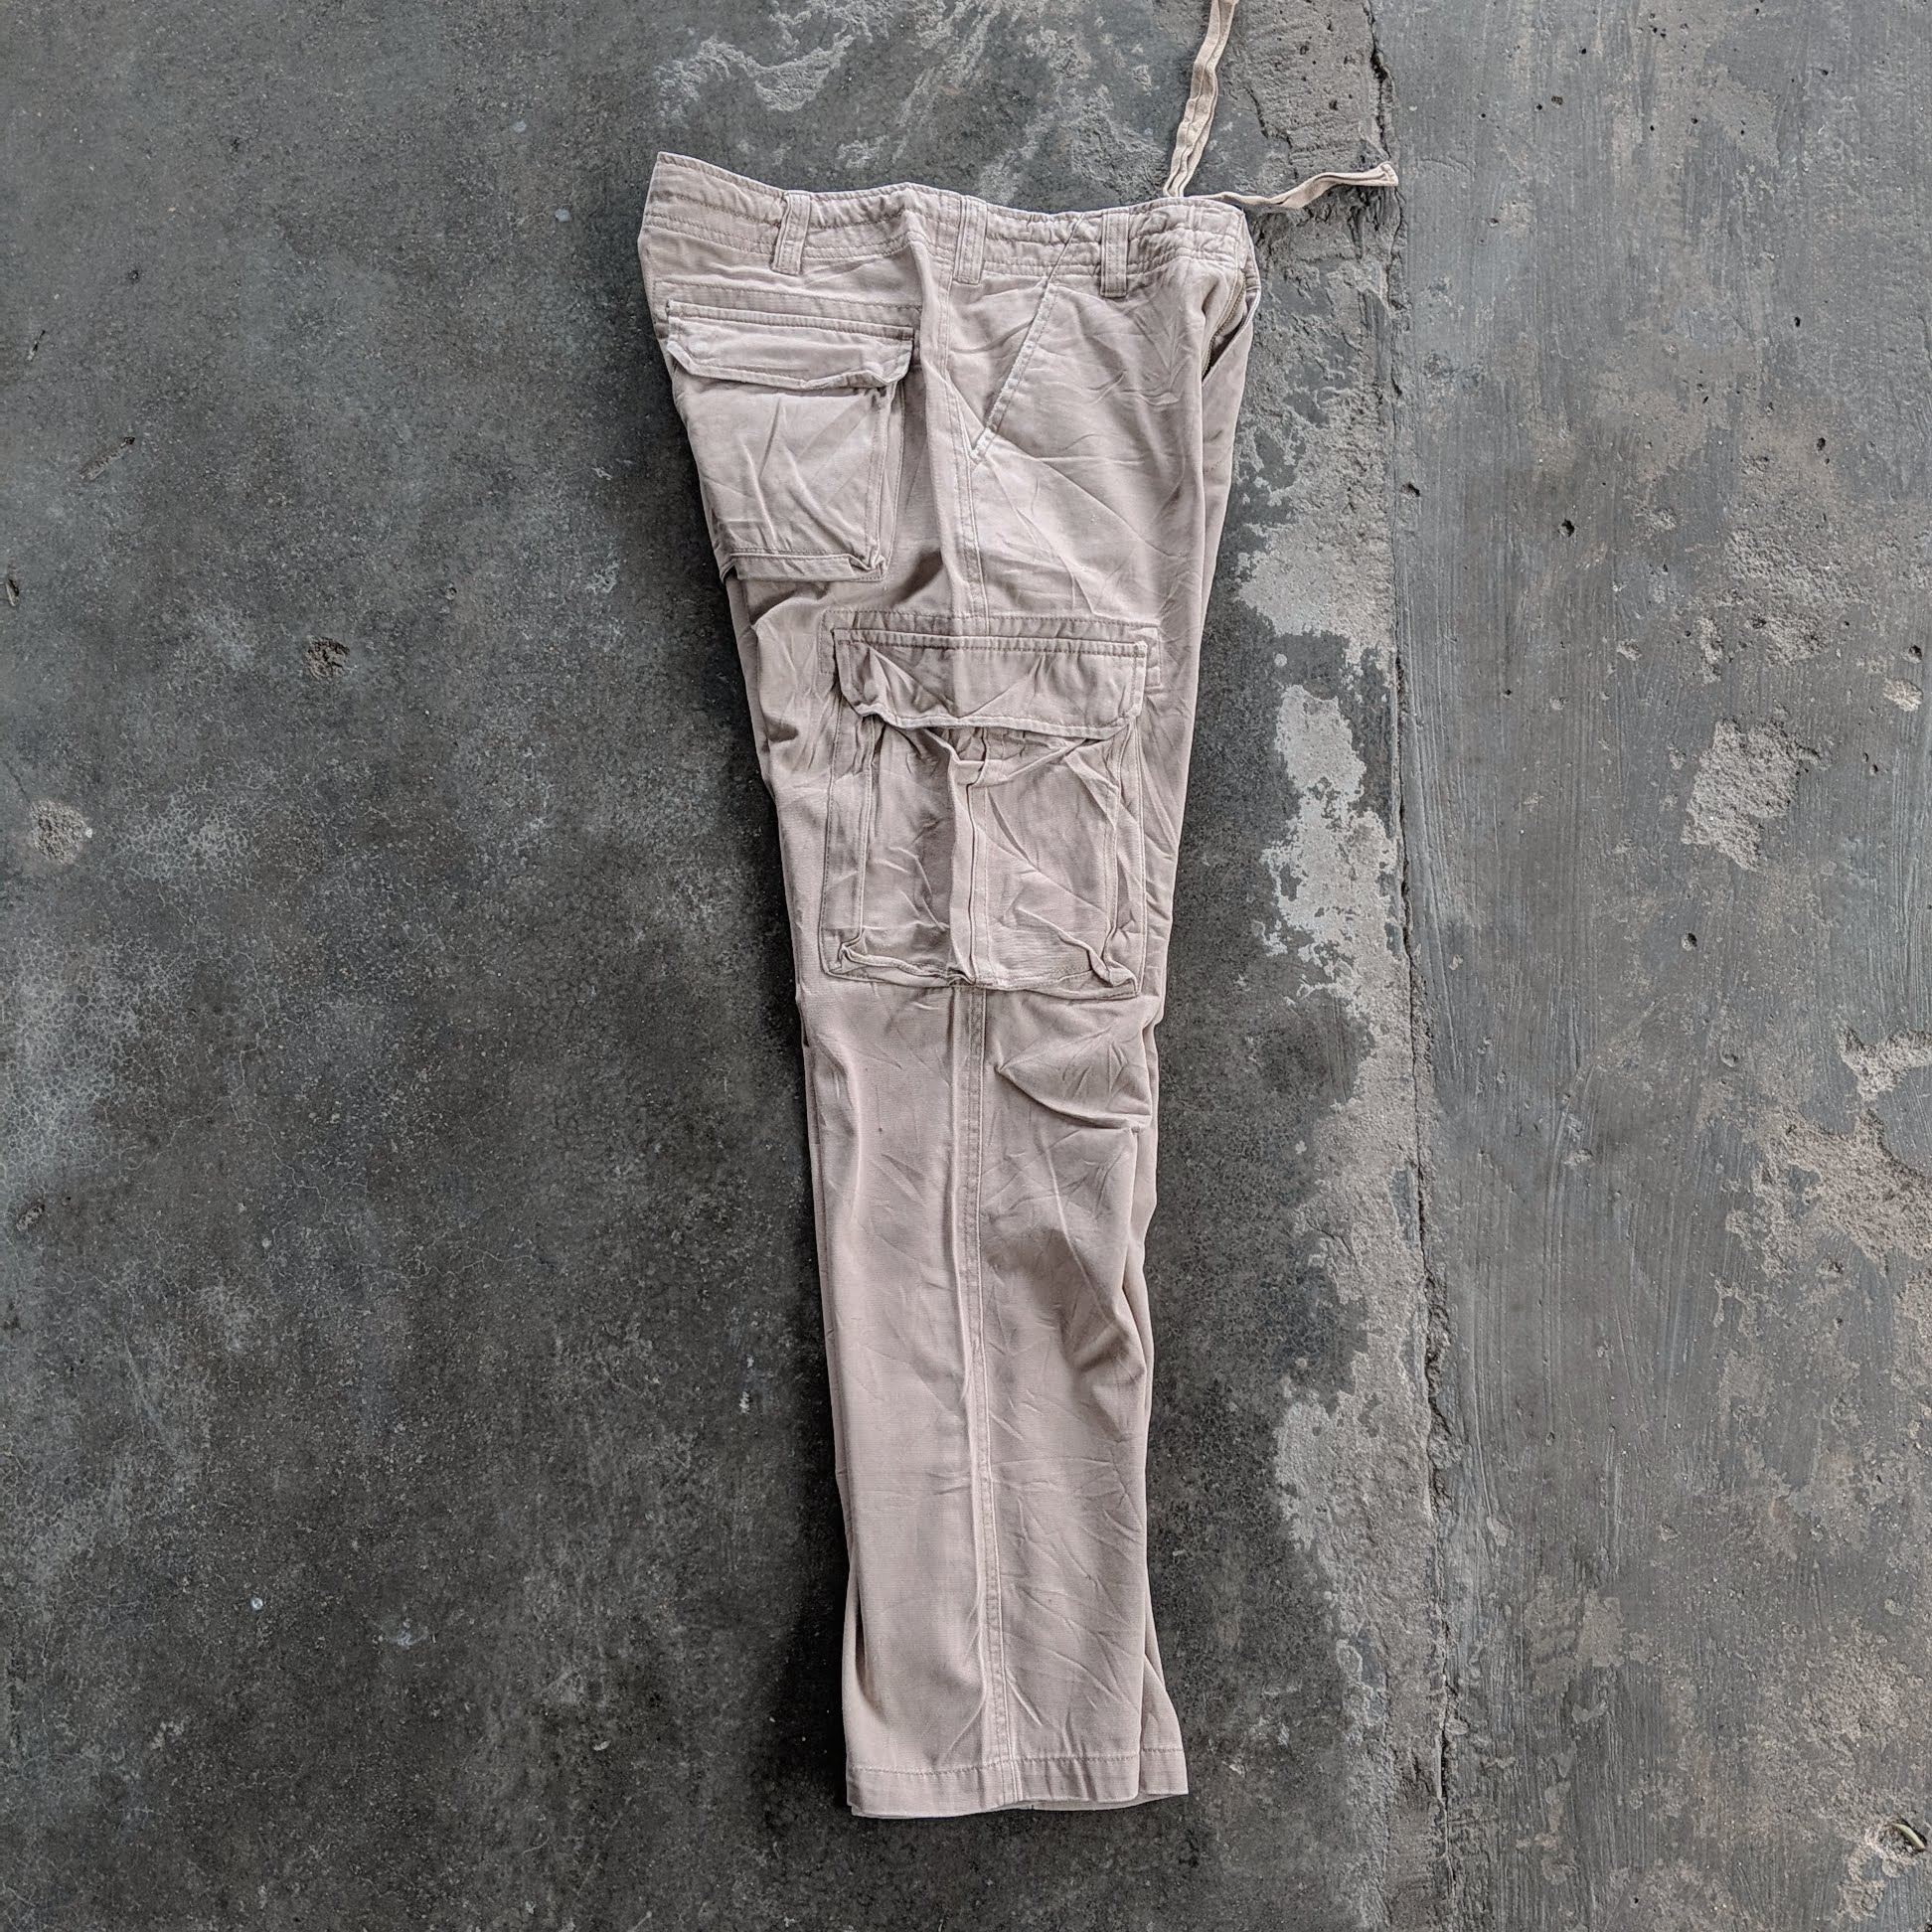 Japanese Brand - Anti Label Jeans Multipocket Trousers Cargo Pants - 14